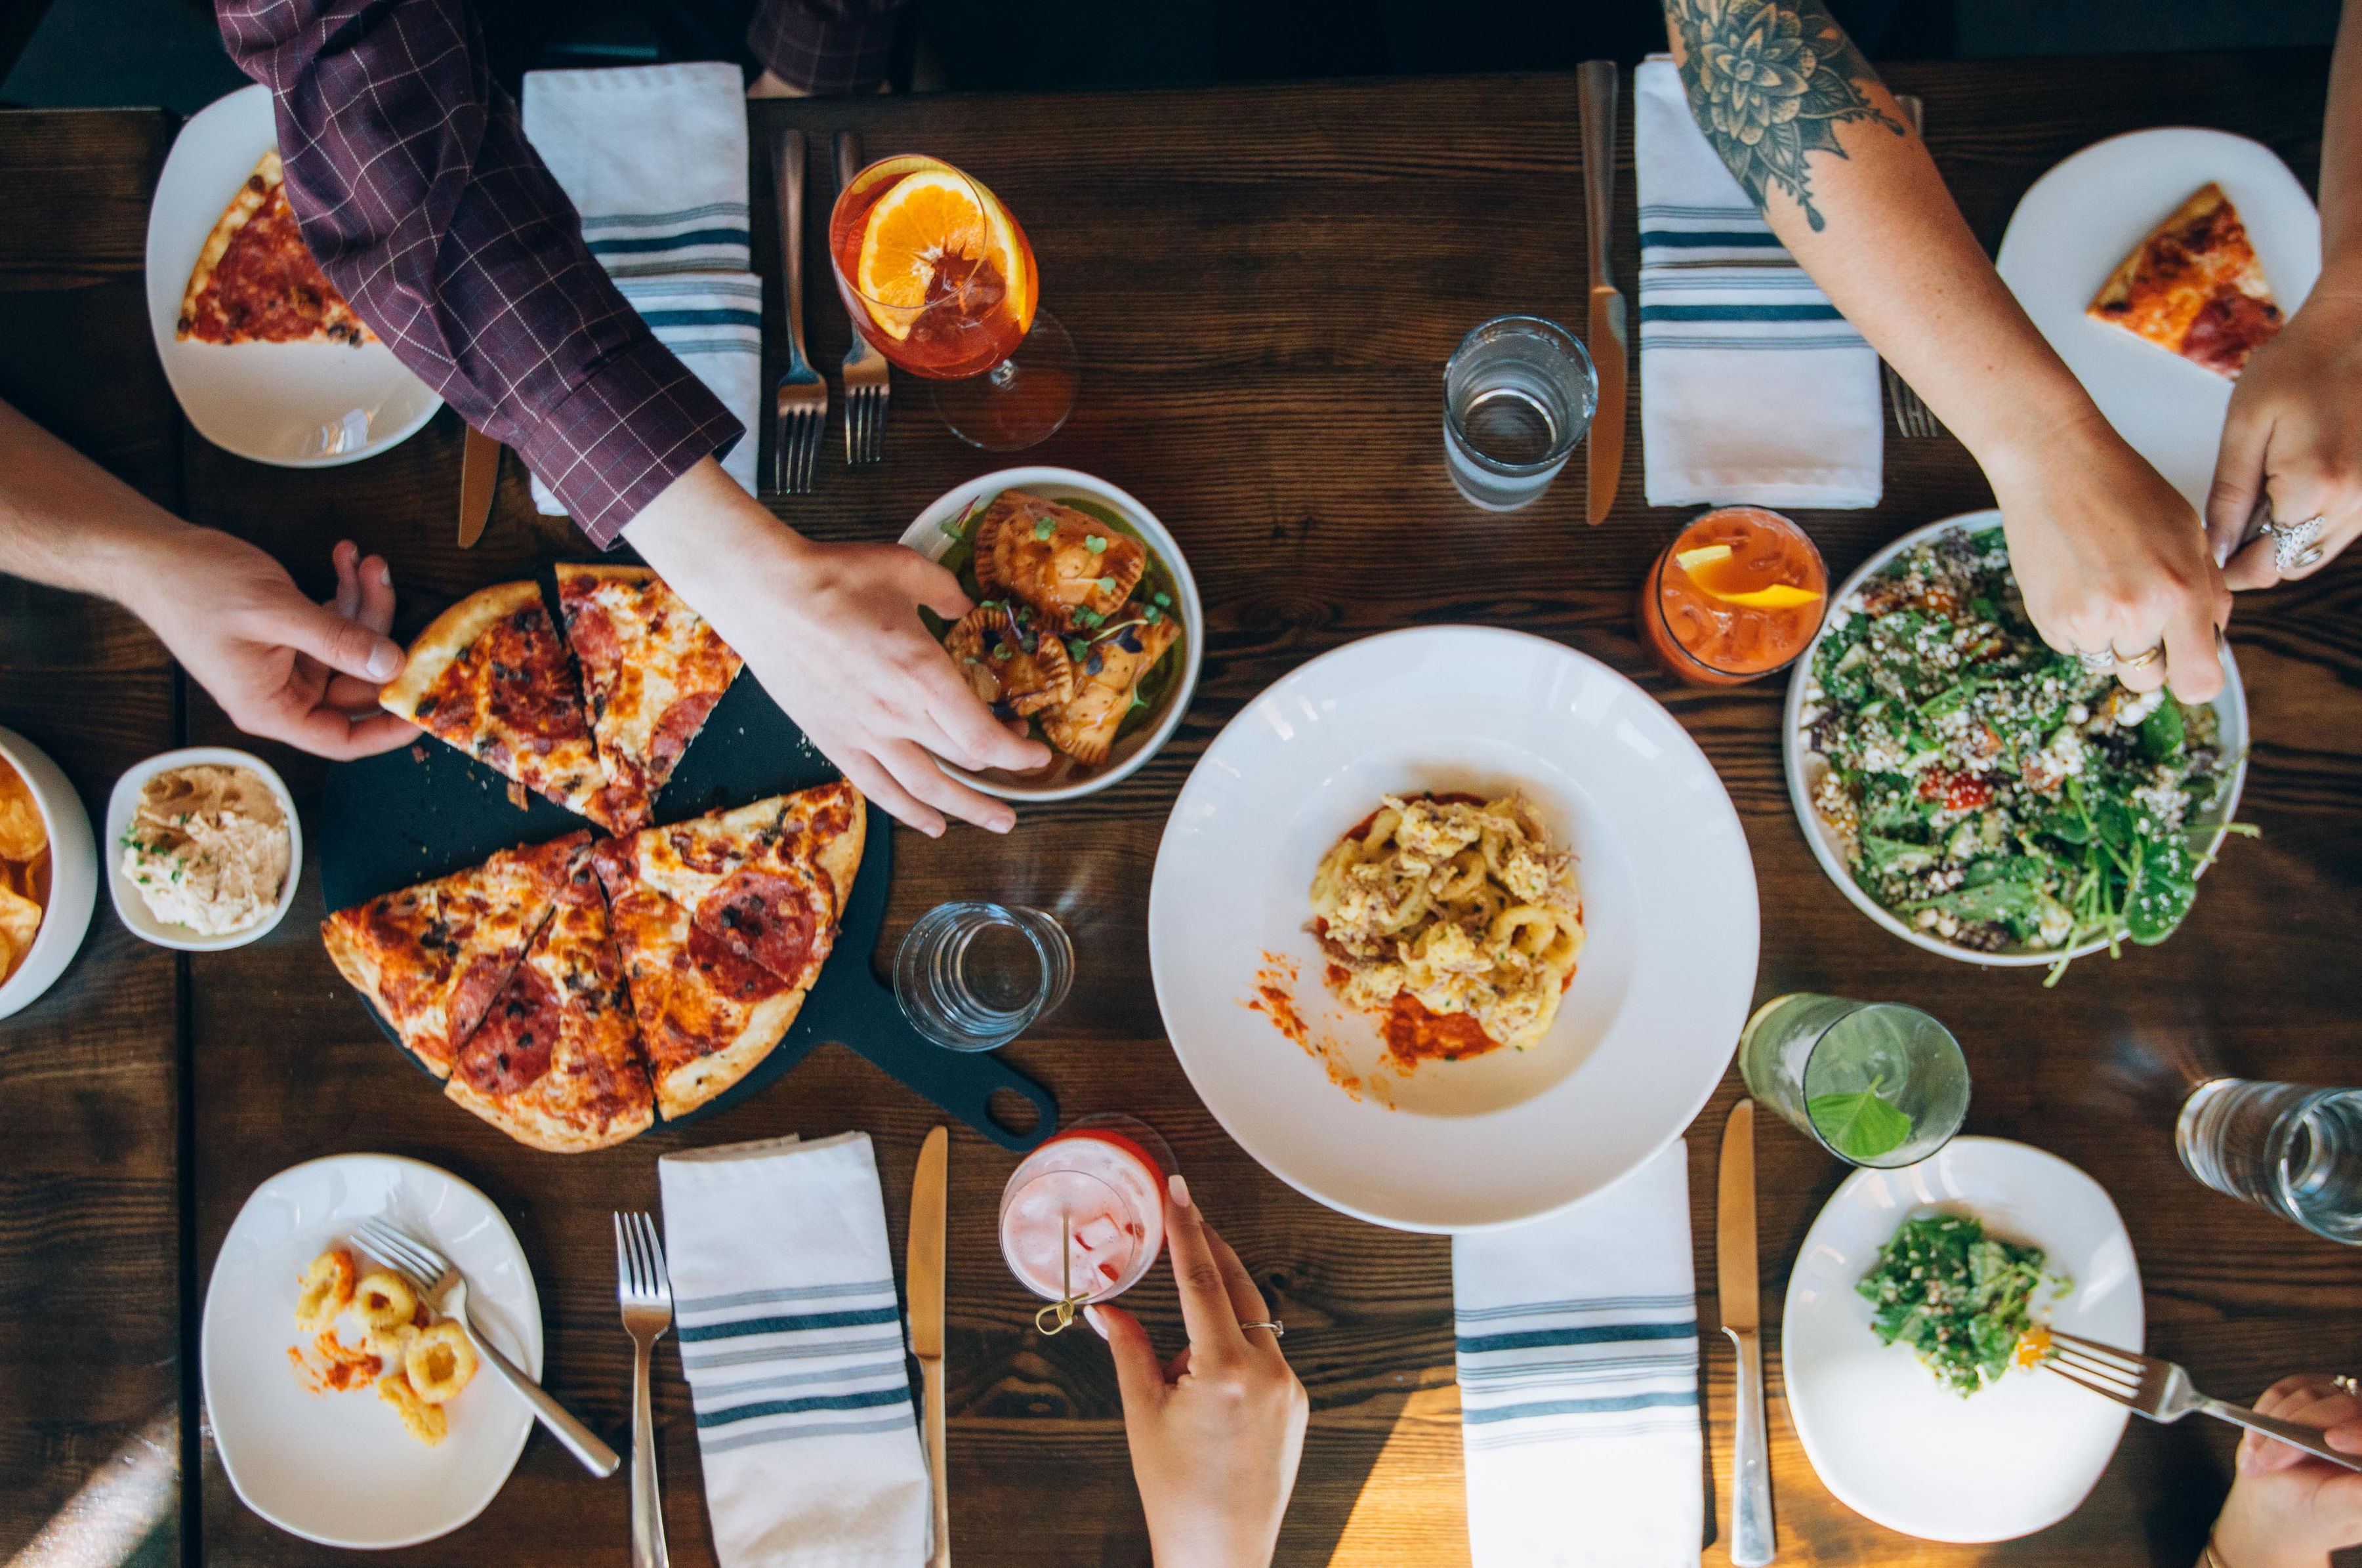 A high shot looking down on a table spread with pizza, salads, beverages and plates, while diners' hands reach from all sides, picking up the food. 